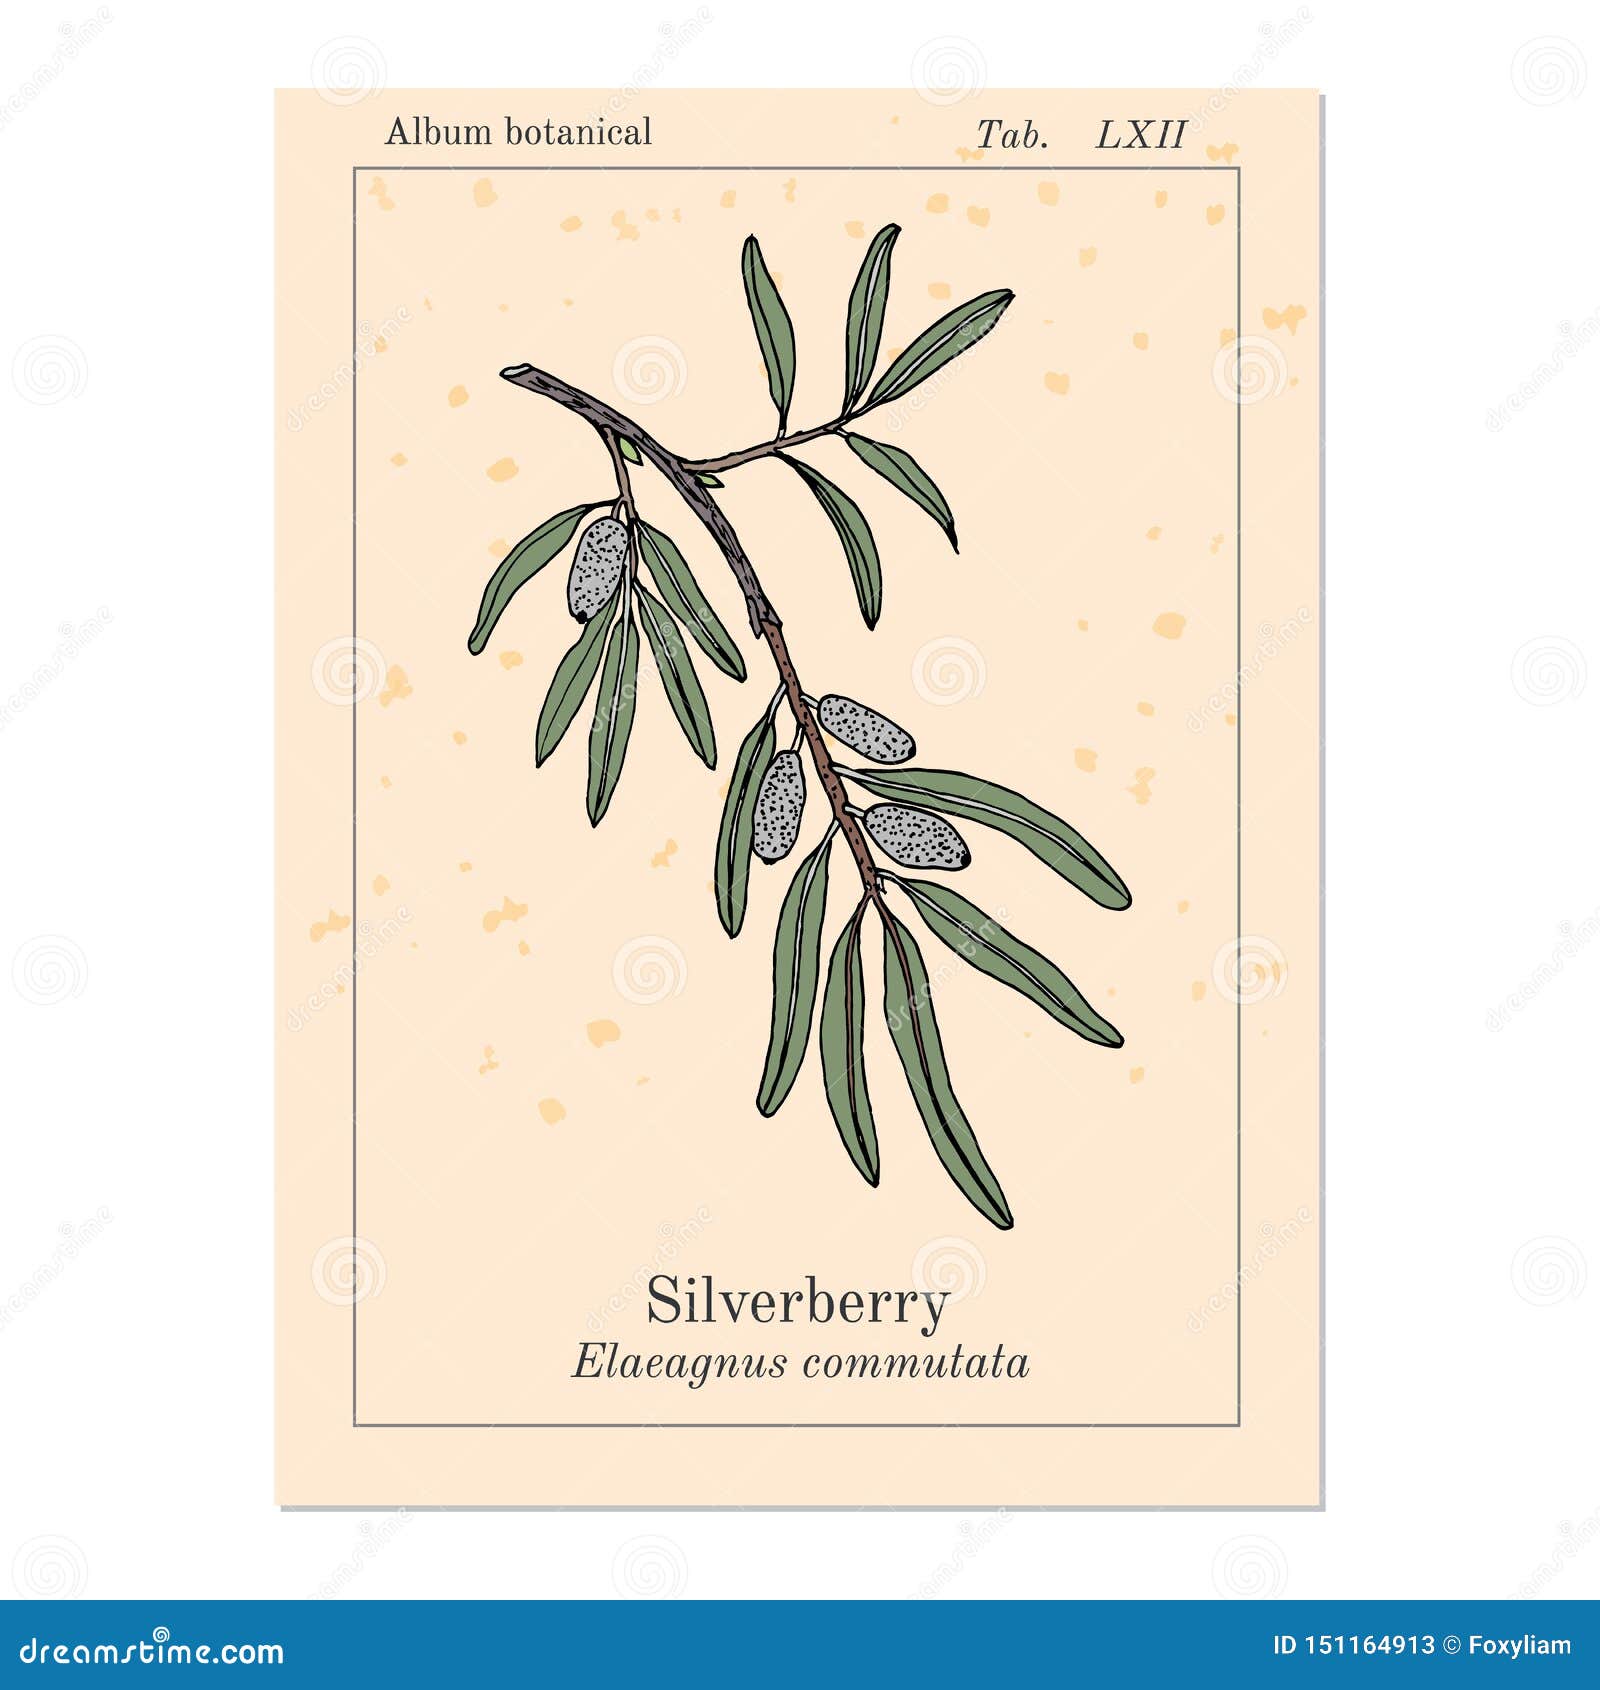 Silverberry Or Wolf Willow Elaeagnus Commutata Medicinal Plant Stock Vector Illustration Of Health Edible 151164913